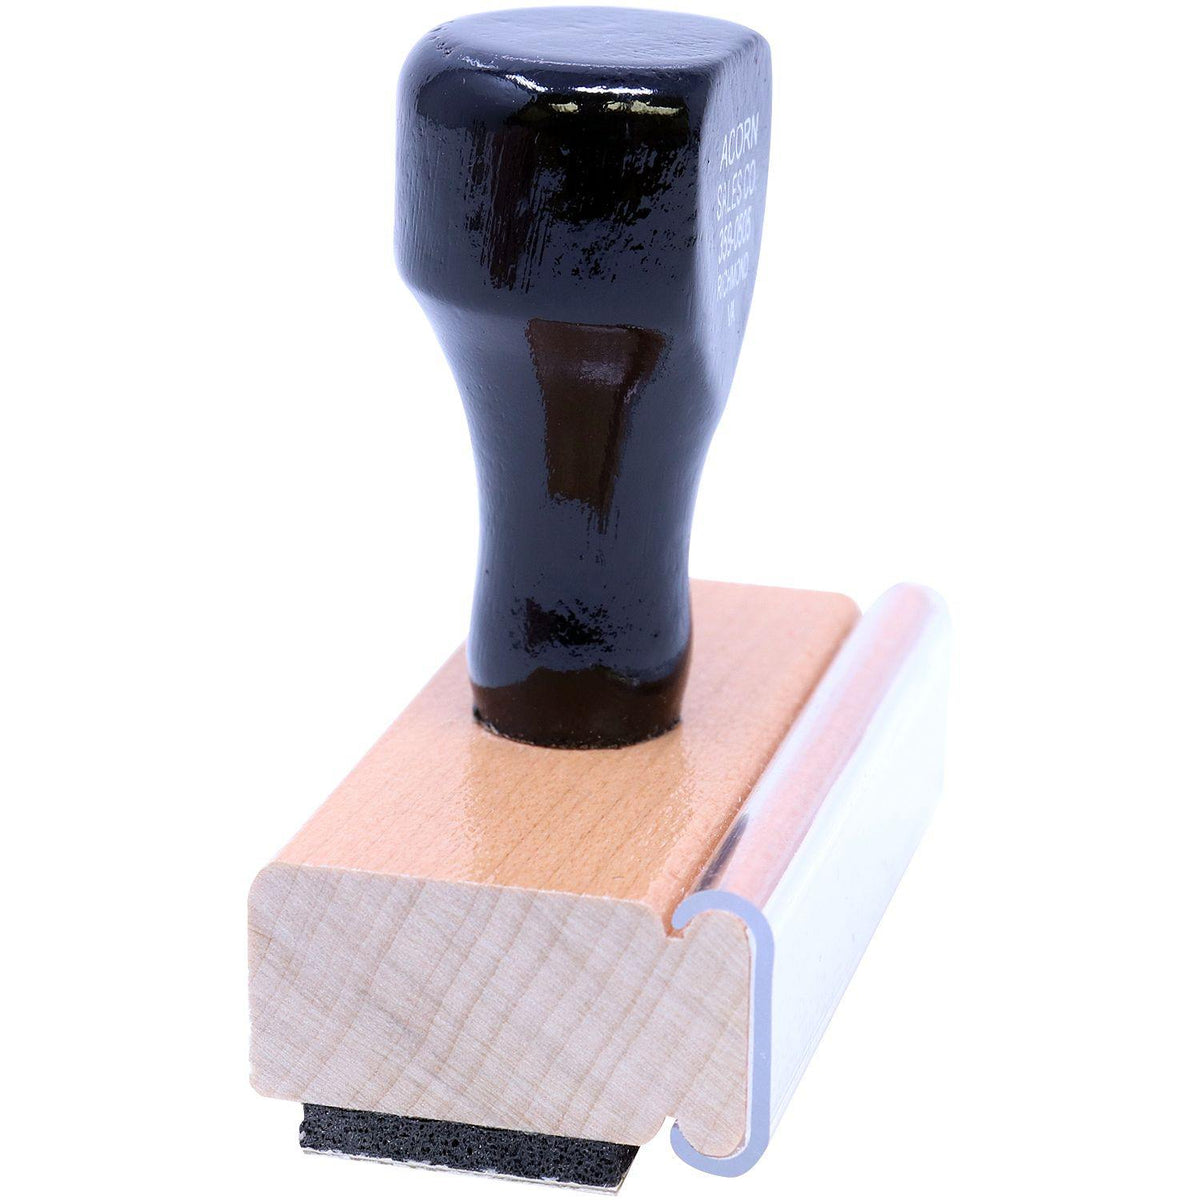 Side View of Large Letter Post Rubber Stamp at an Angle